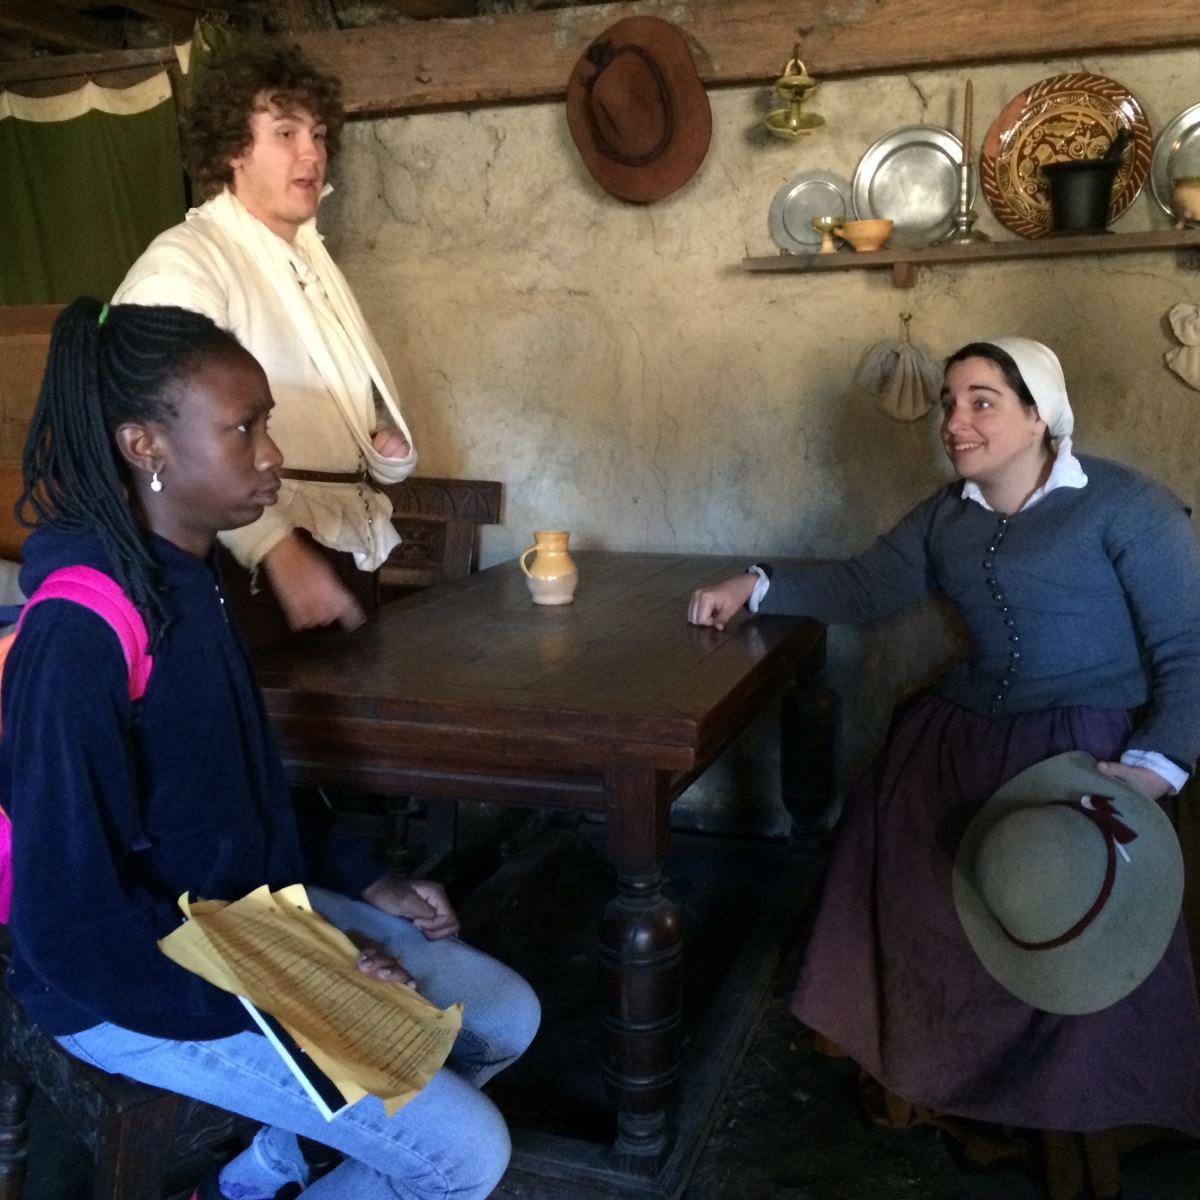 Plimoth – Still going strong